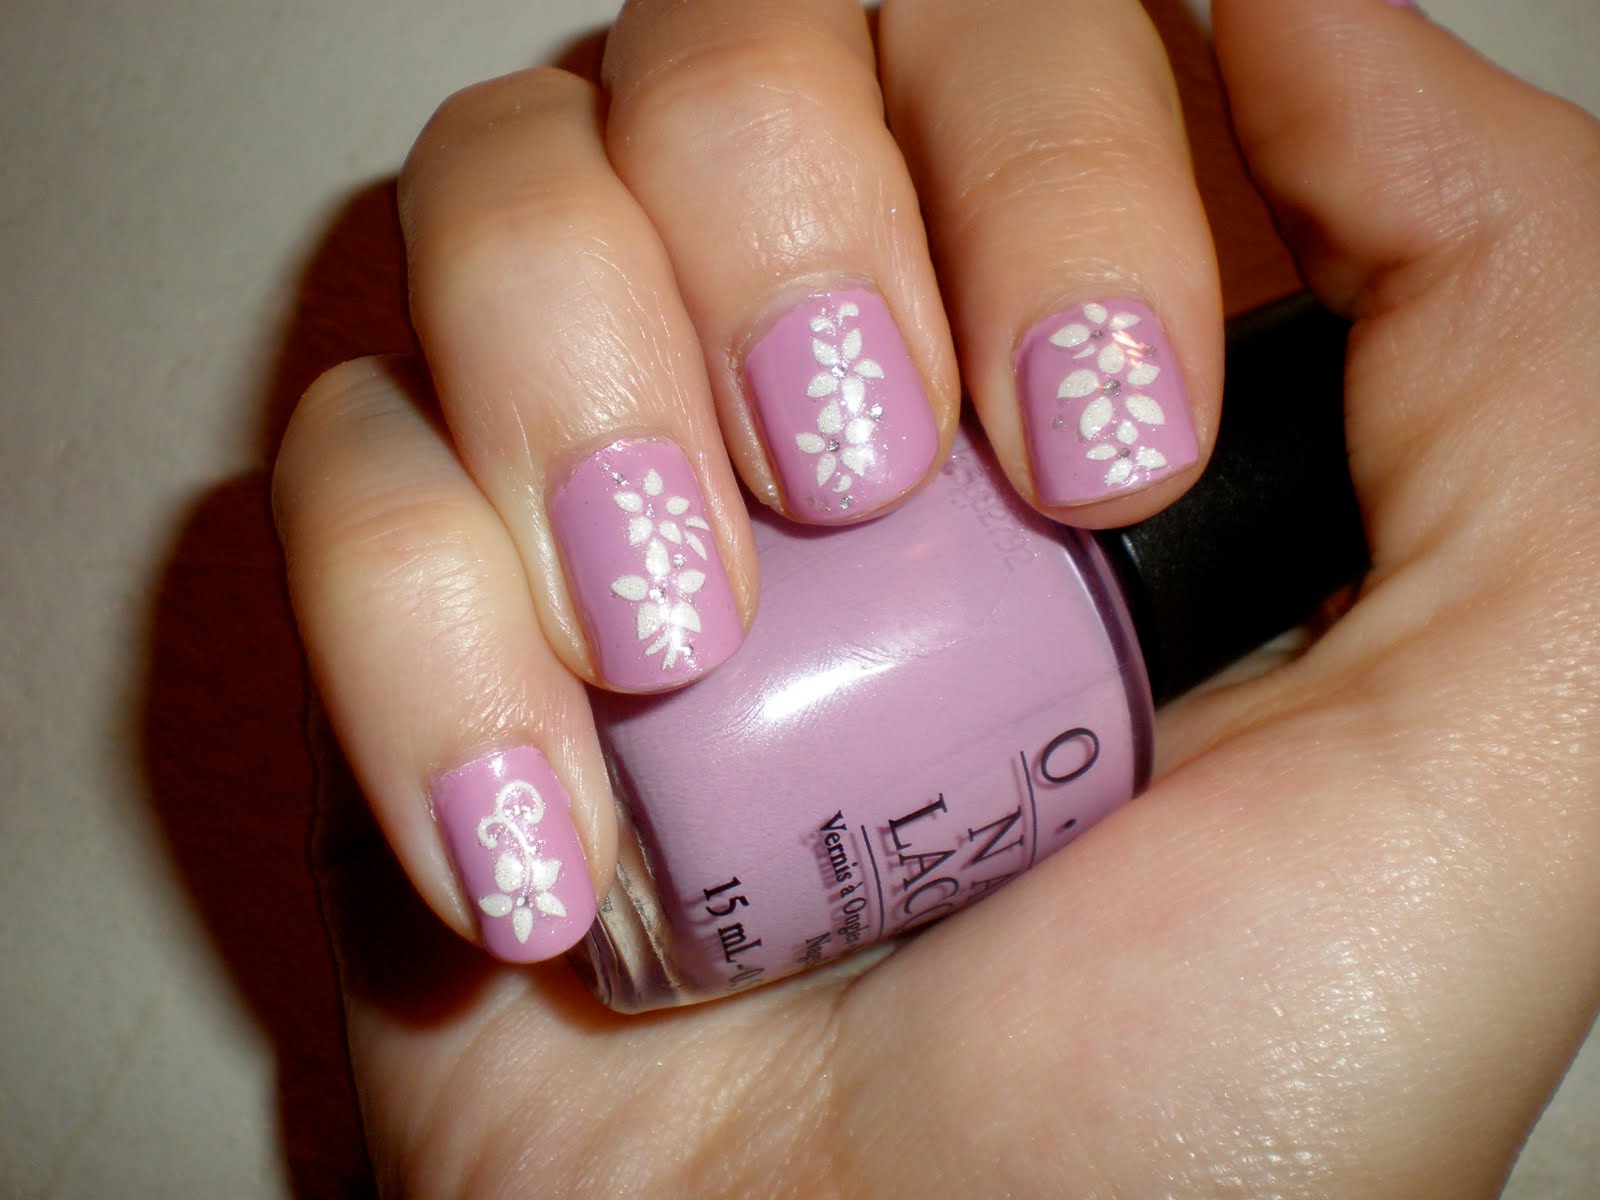 10 Easy Nail Designs You Can Do at Home - wide 5